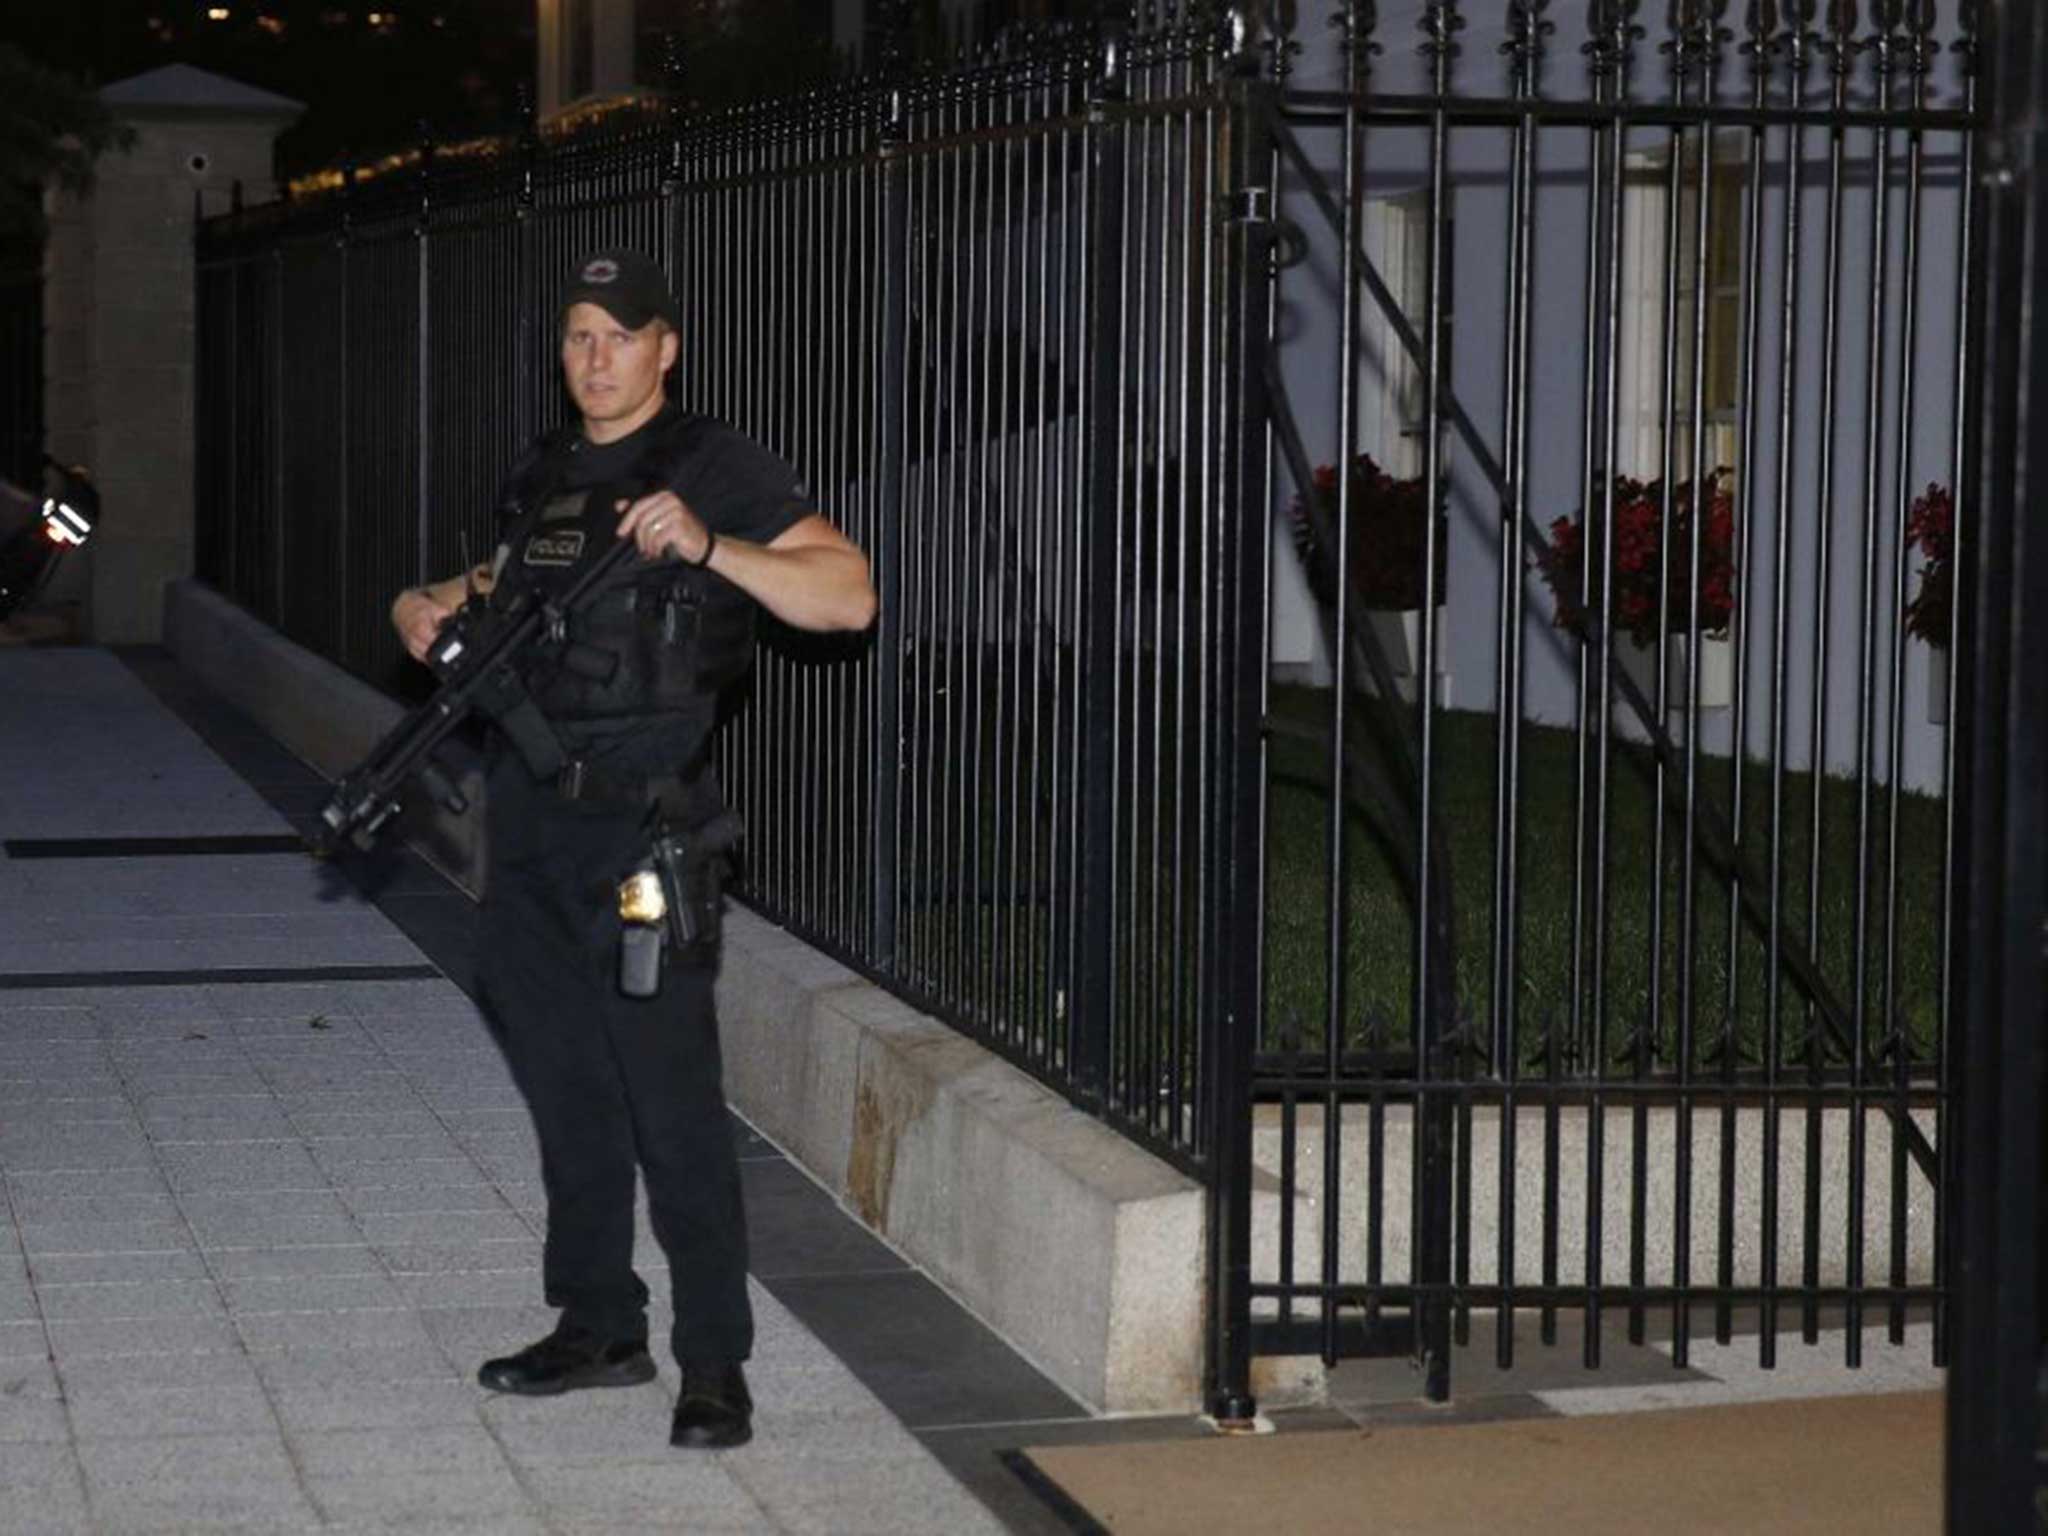 A heavily armed officer outside the White House last night